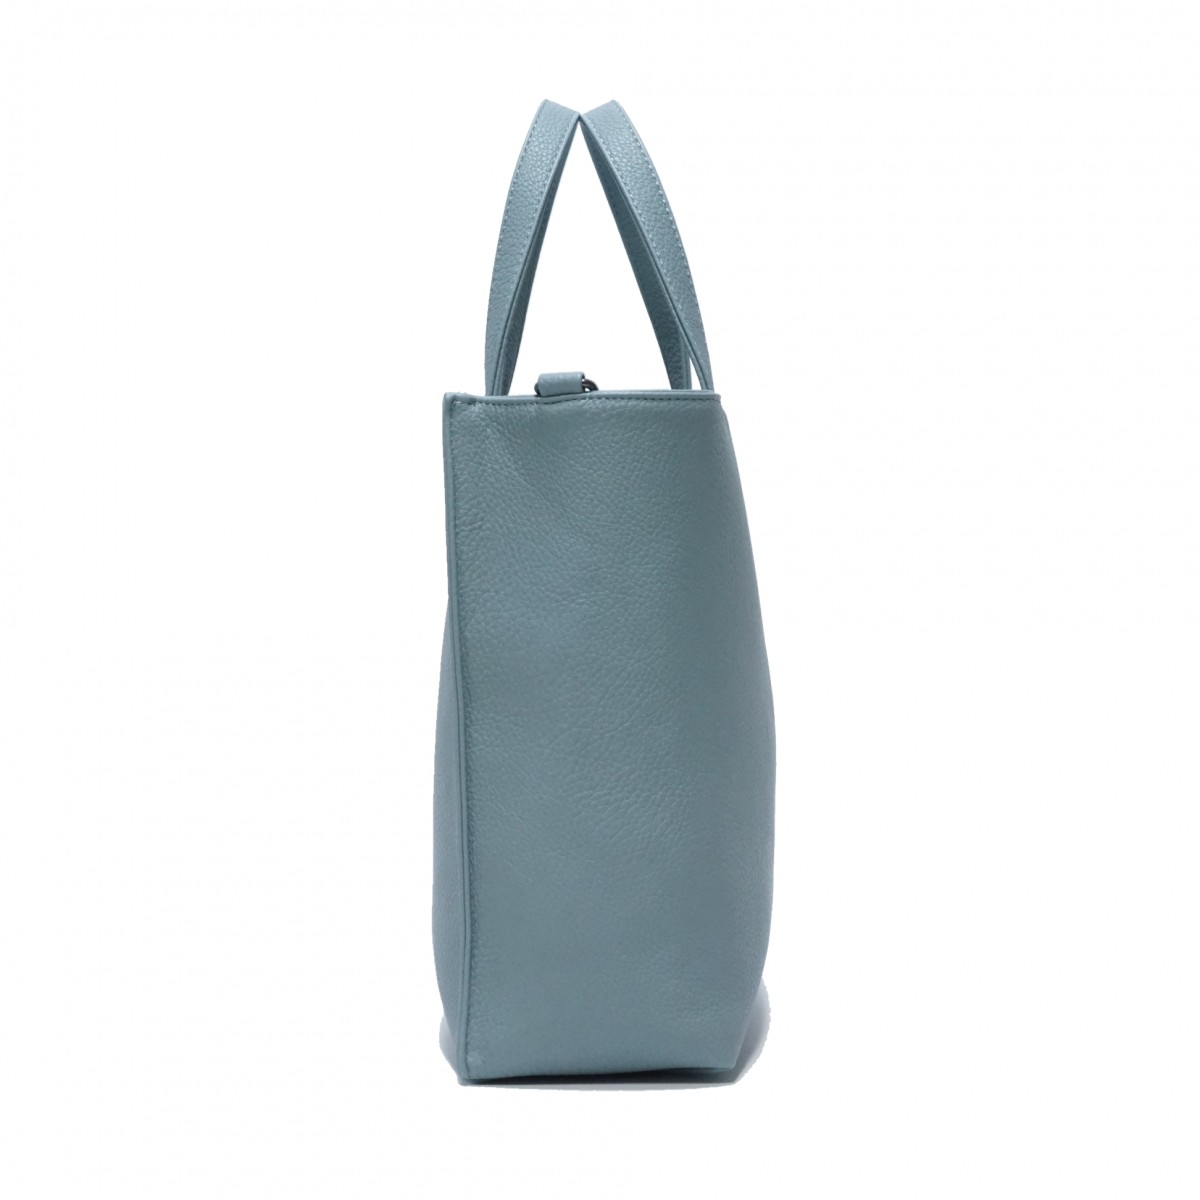 Charlie 2-in-1 Tote - Light Grey